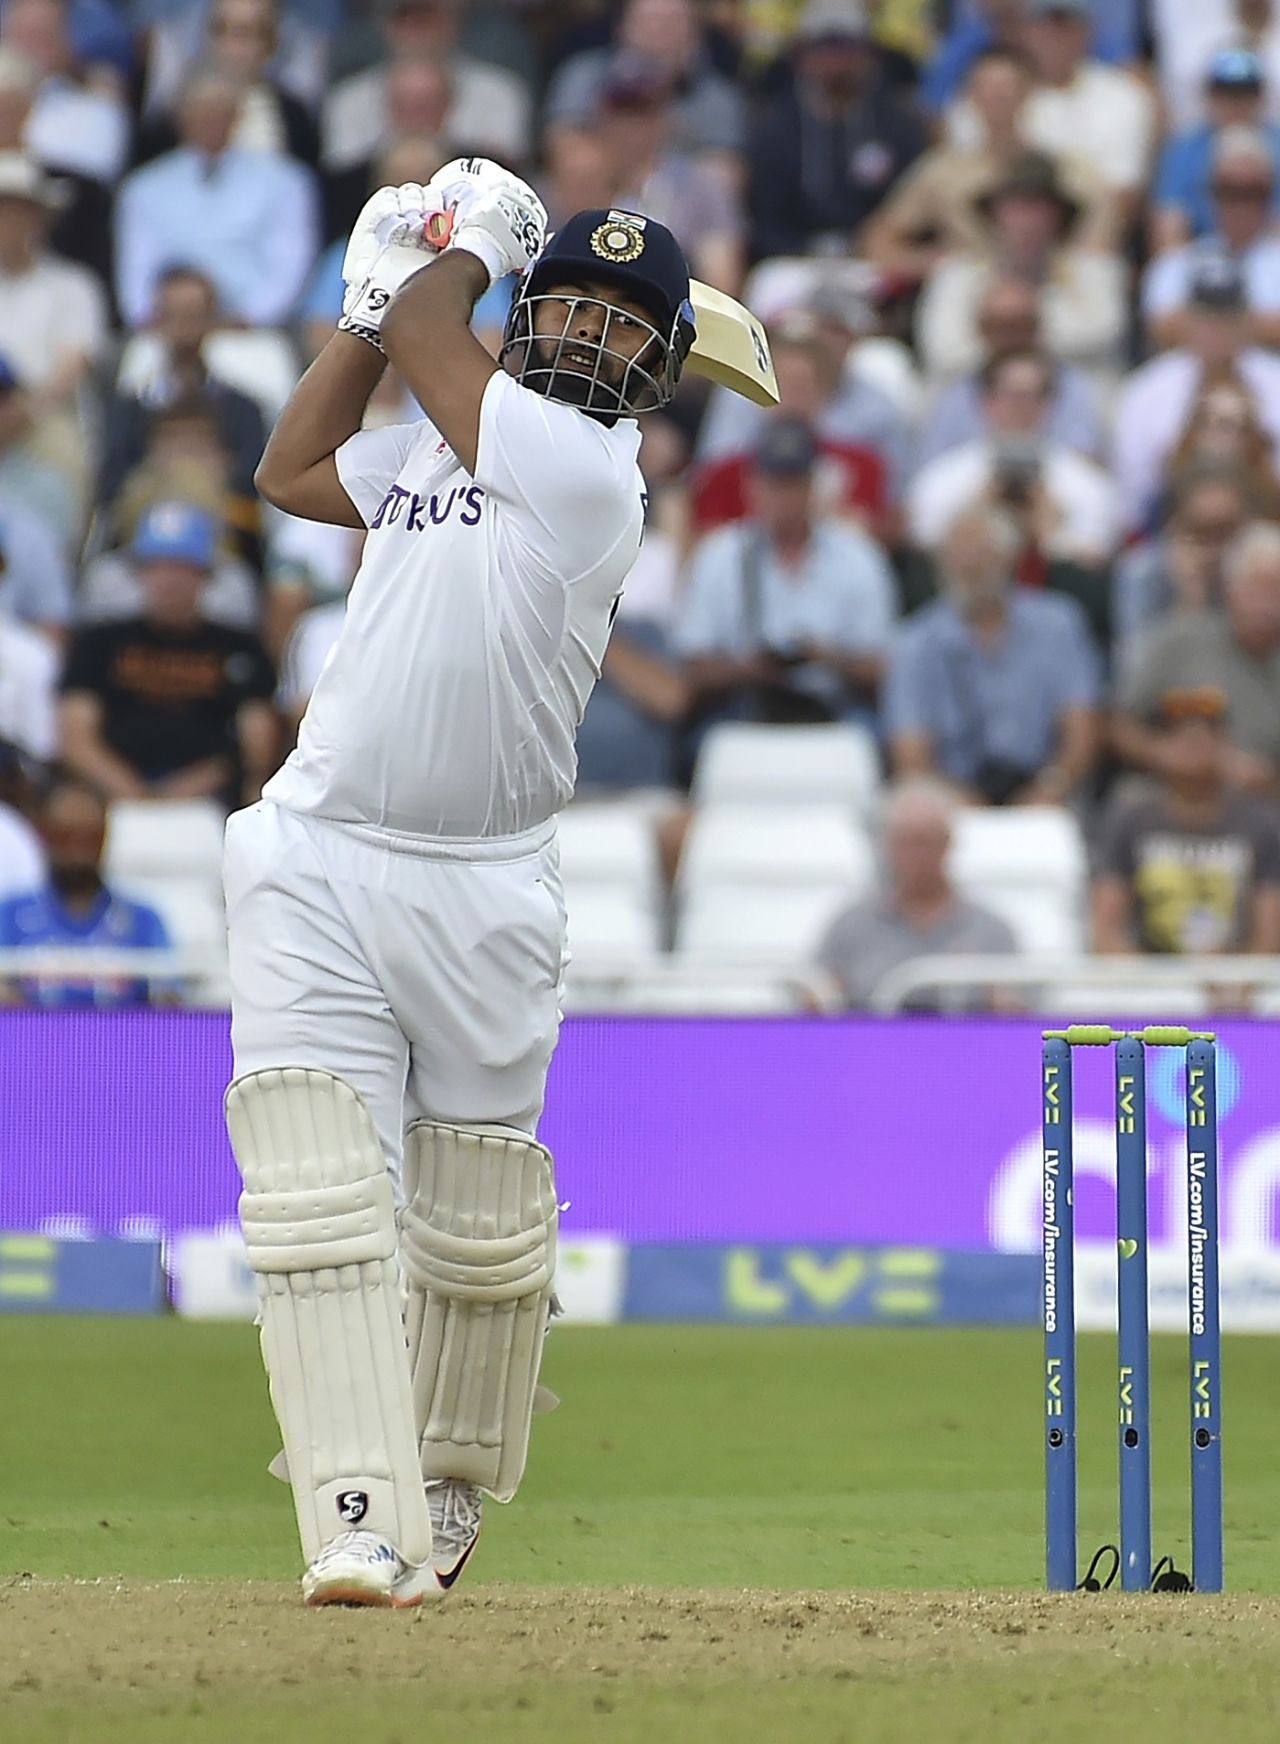 Rishabh Pant thrashes one over mid-off, England vs India, 1st Test, Nottingham, 2nd day, August 5, 2021